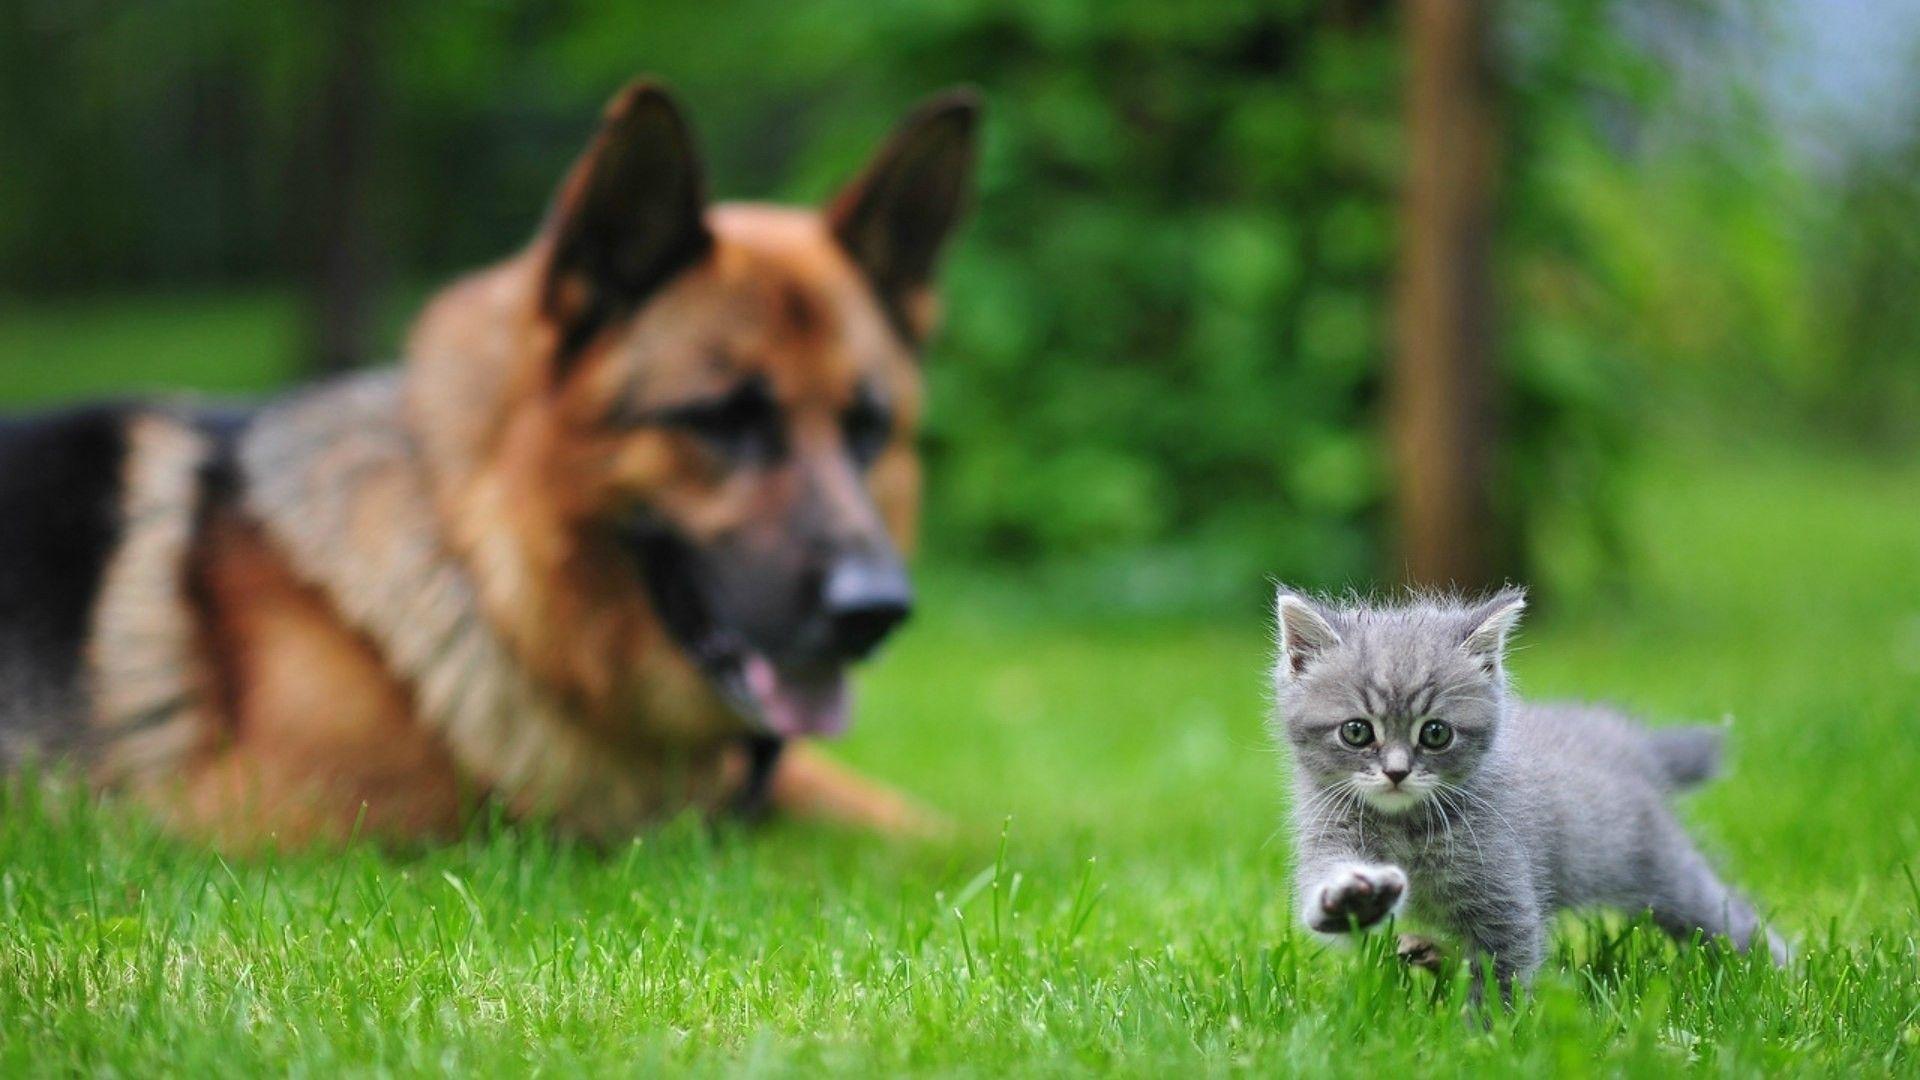 Cats And Dogs Funny Image Wallpaper